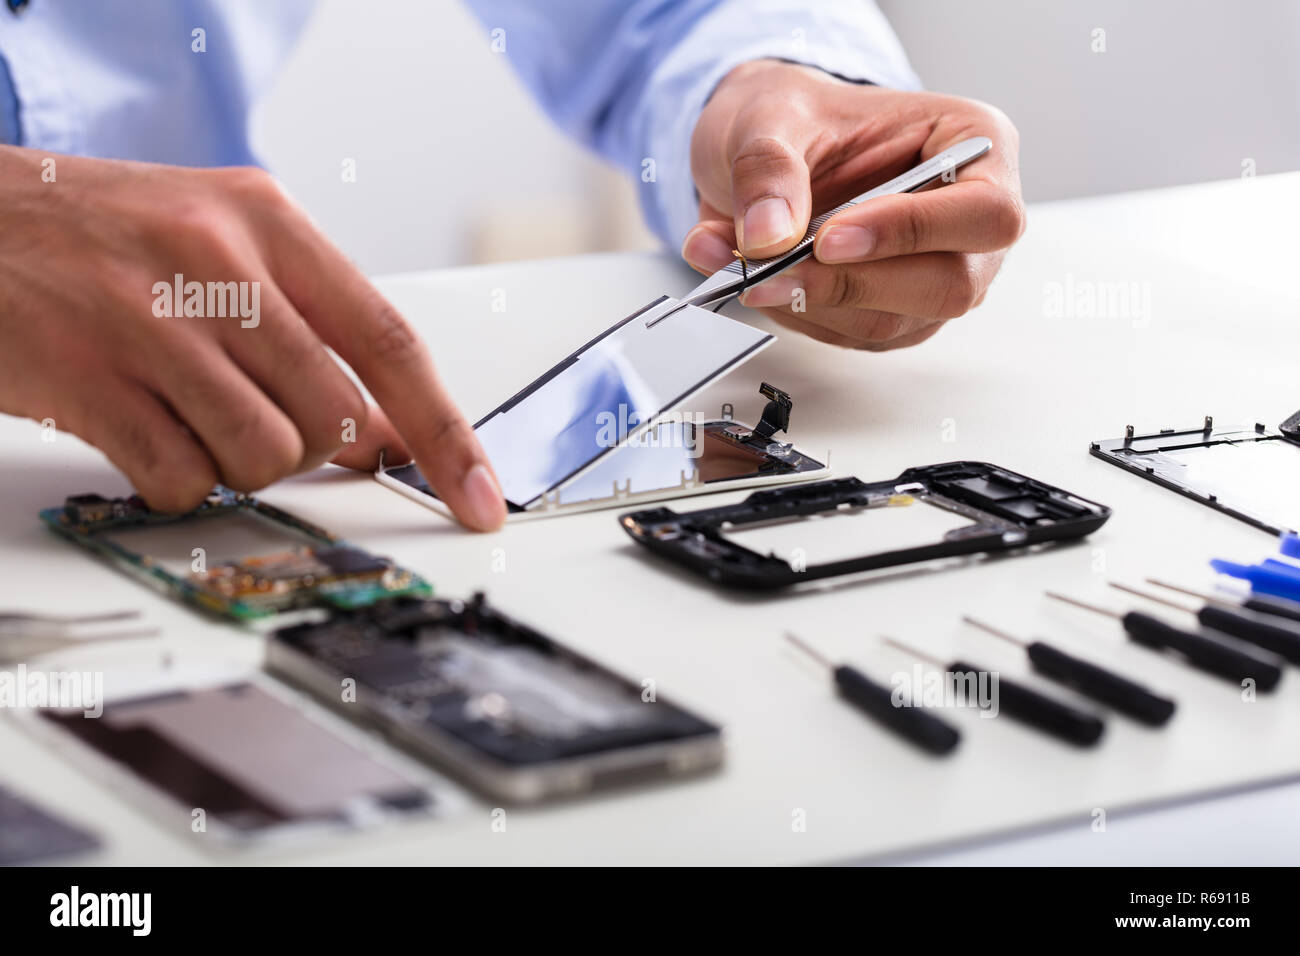 Technician Fixing Damaged Screen On Mobile Phone Stock Photo